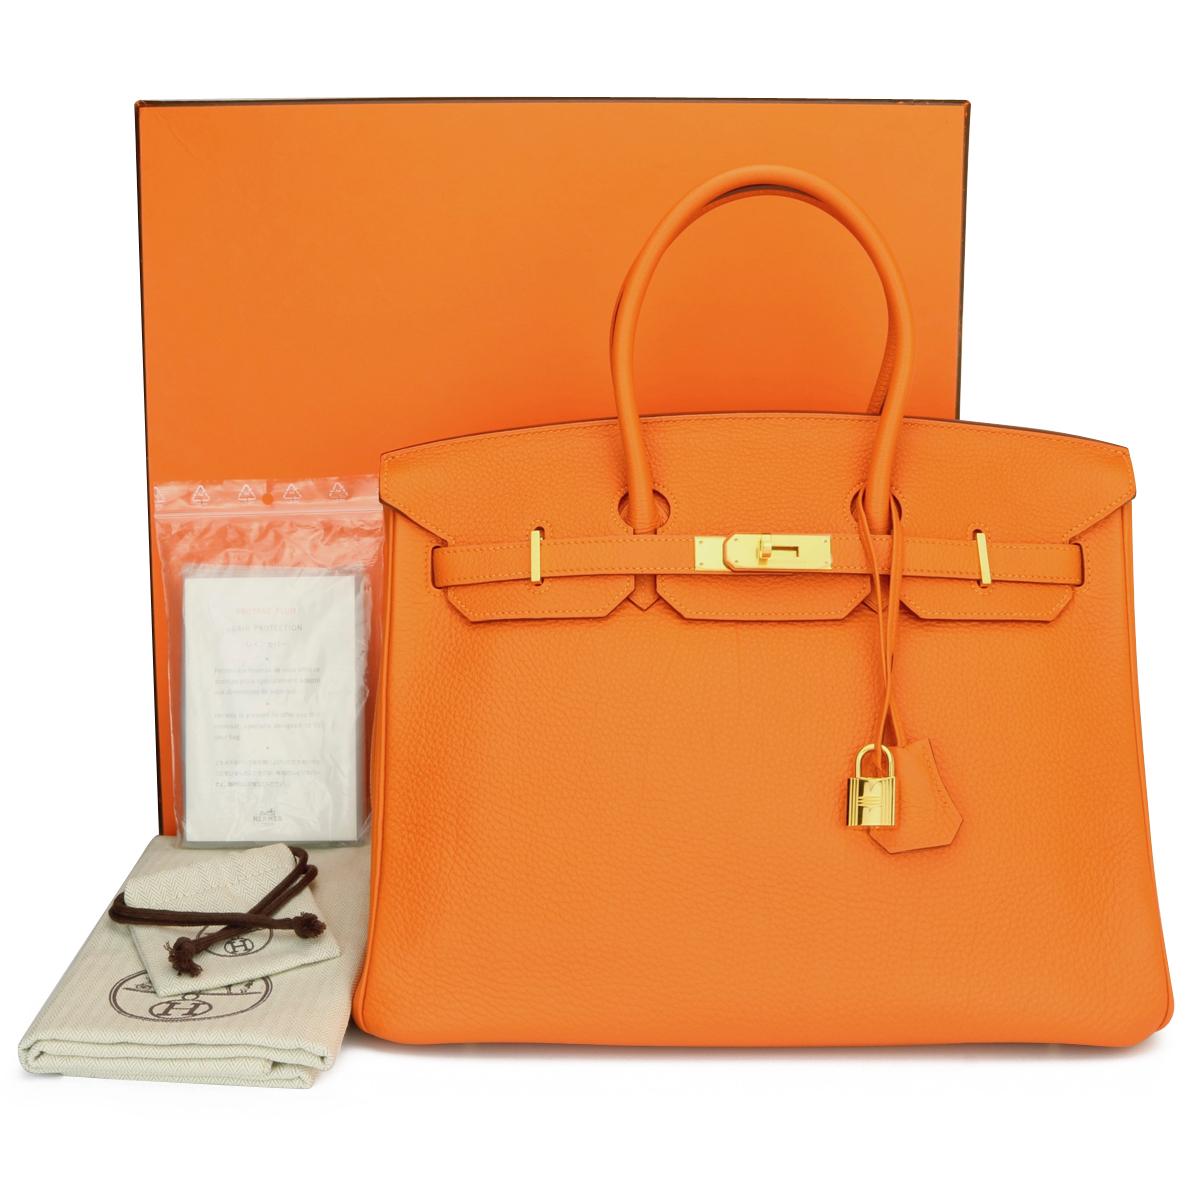 Authentic Hermès Birkin 35cm Orange Togo Leather with Gold Hardware Stamp N Year 2010

This bag is still in mint condition. The bag still holds to the shape well. The hardware still very shiny and covered by the original protective